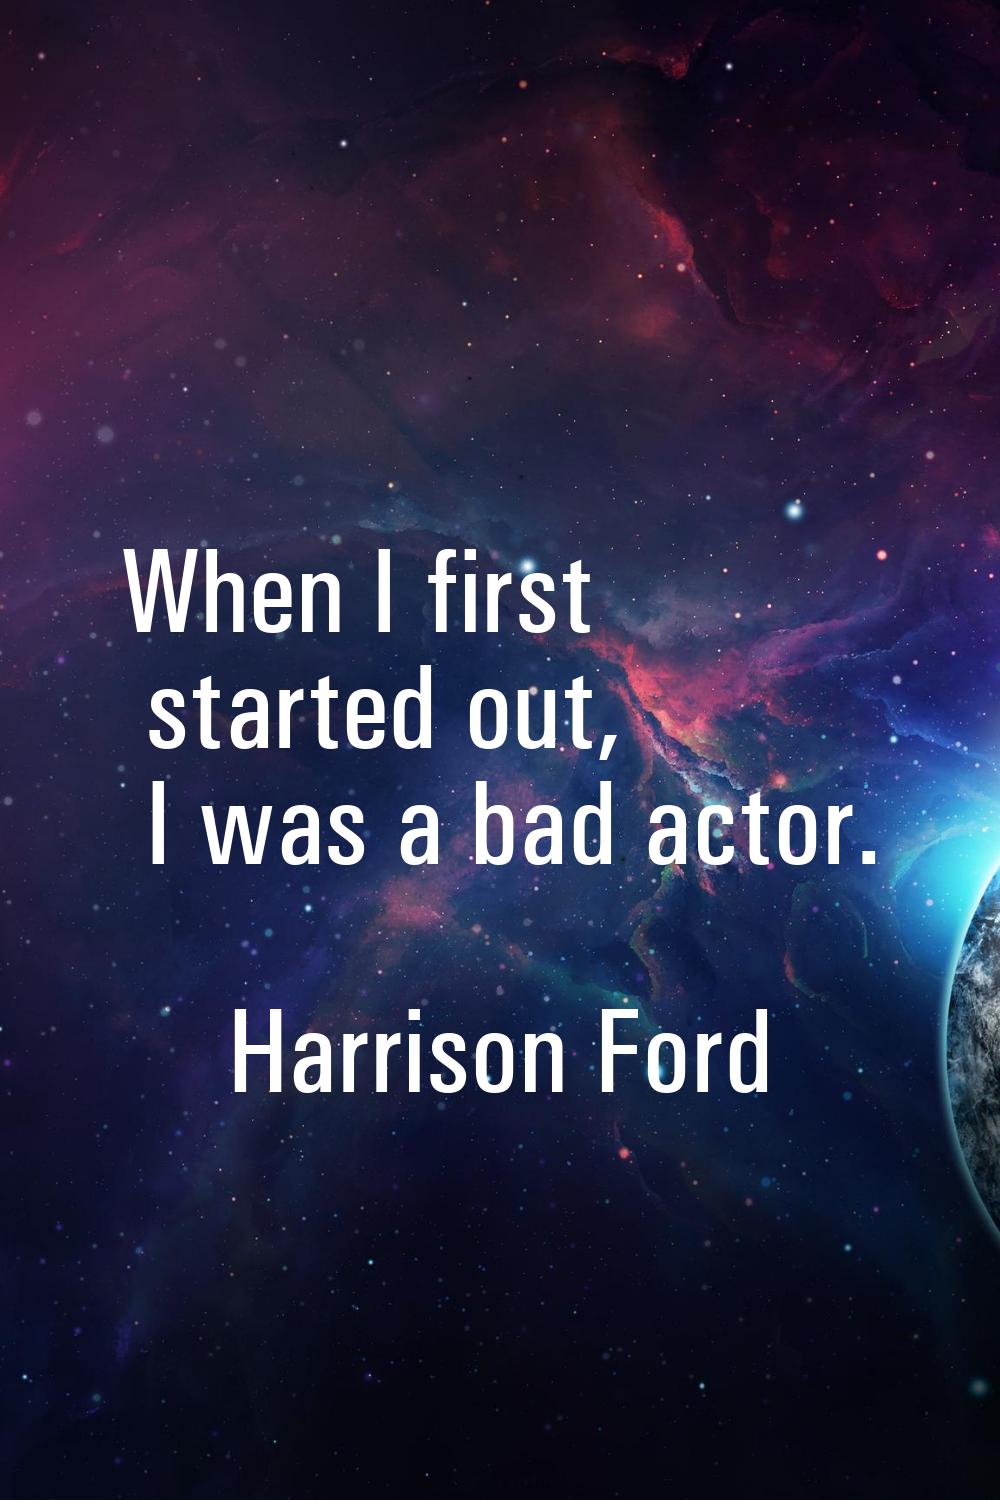 When I first started out, I was a bad actor.